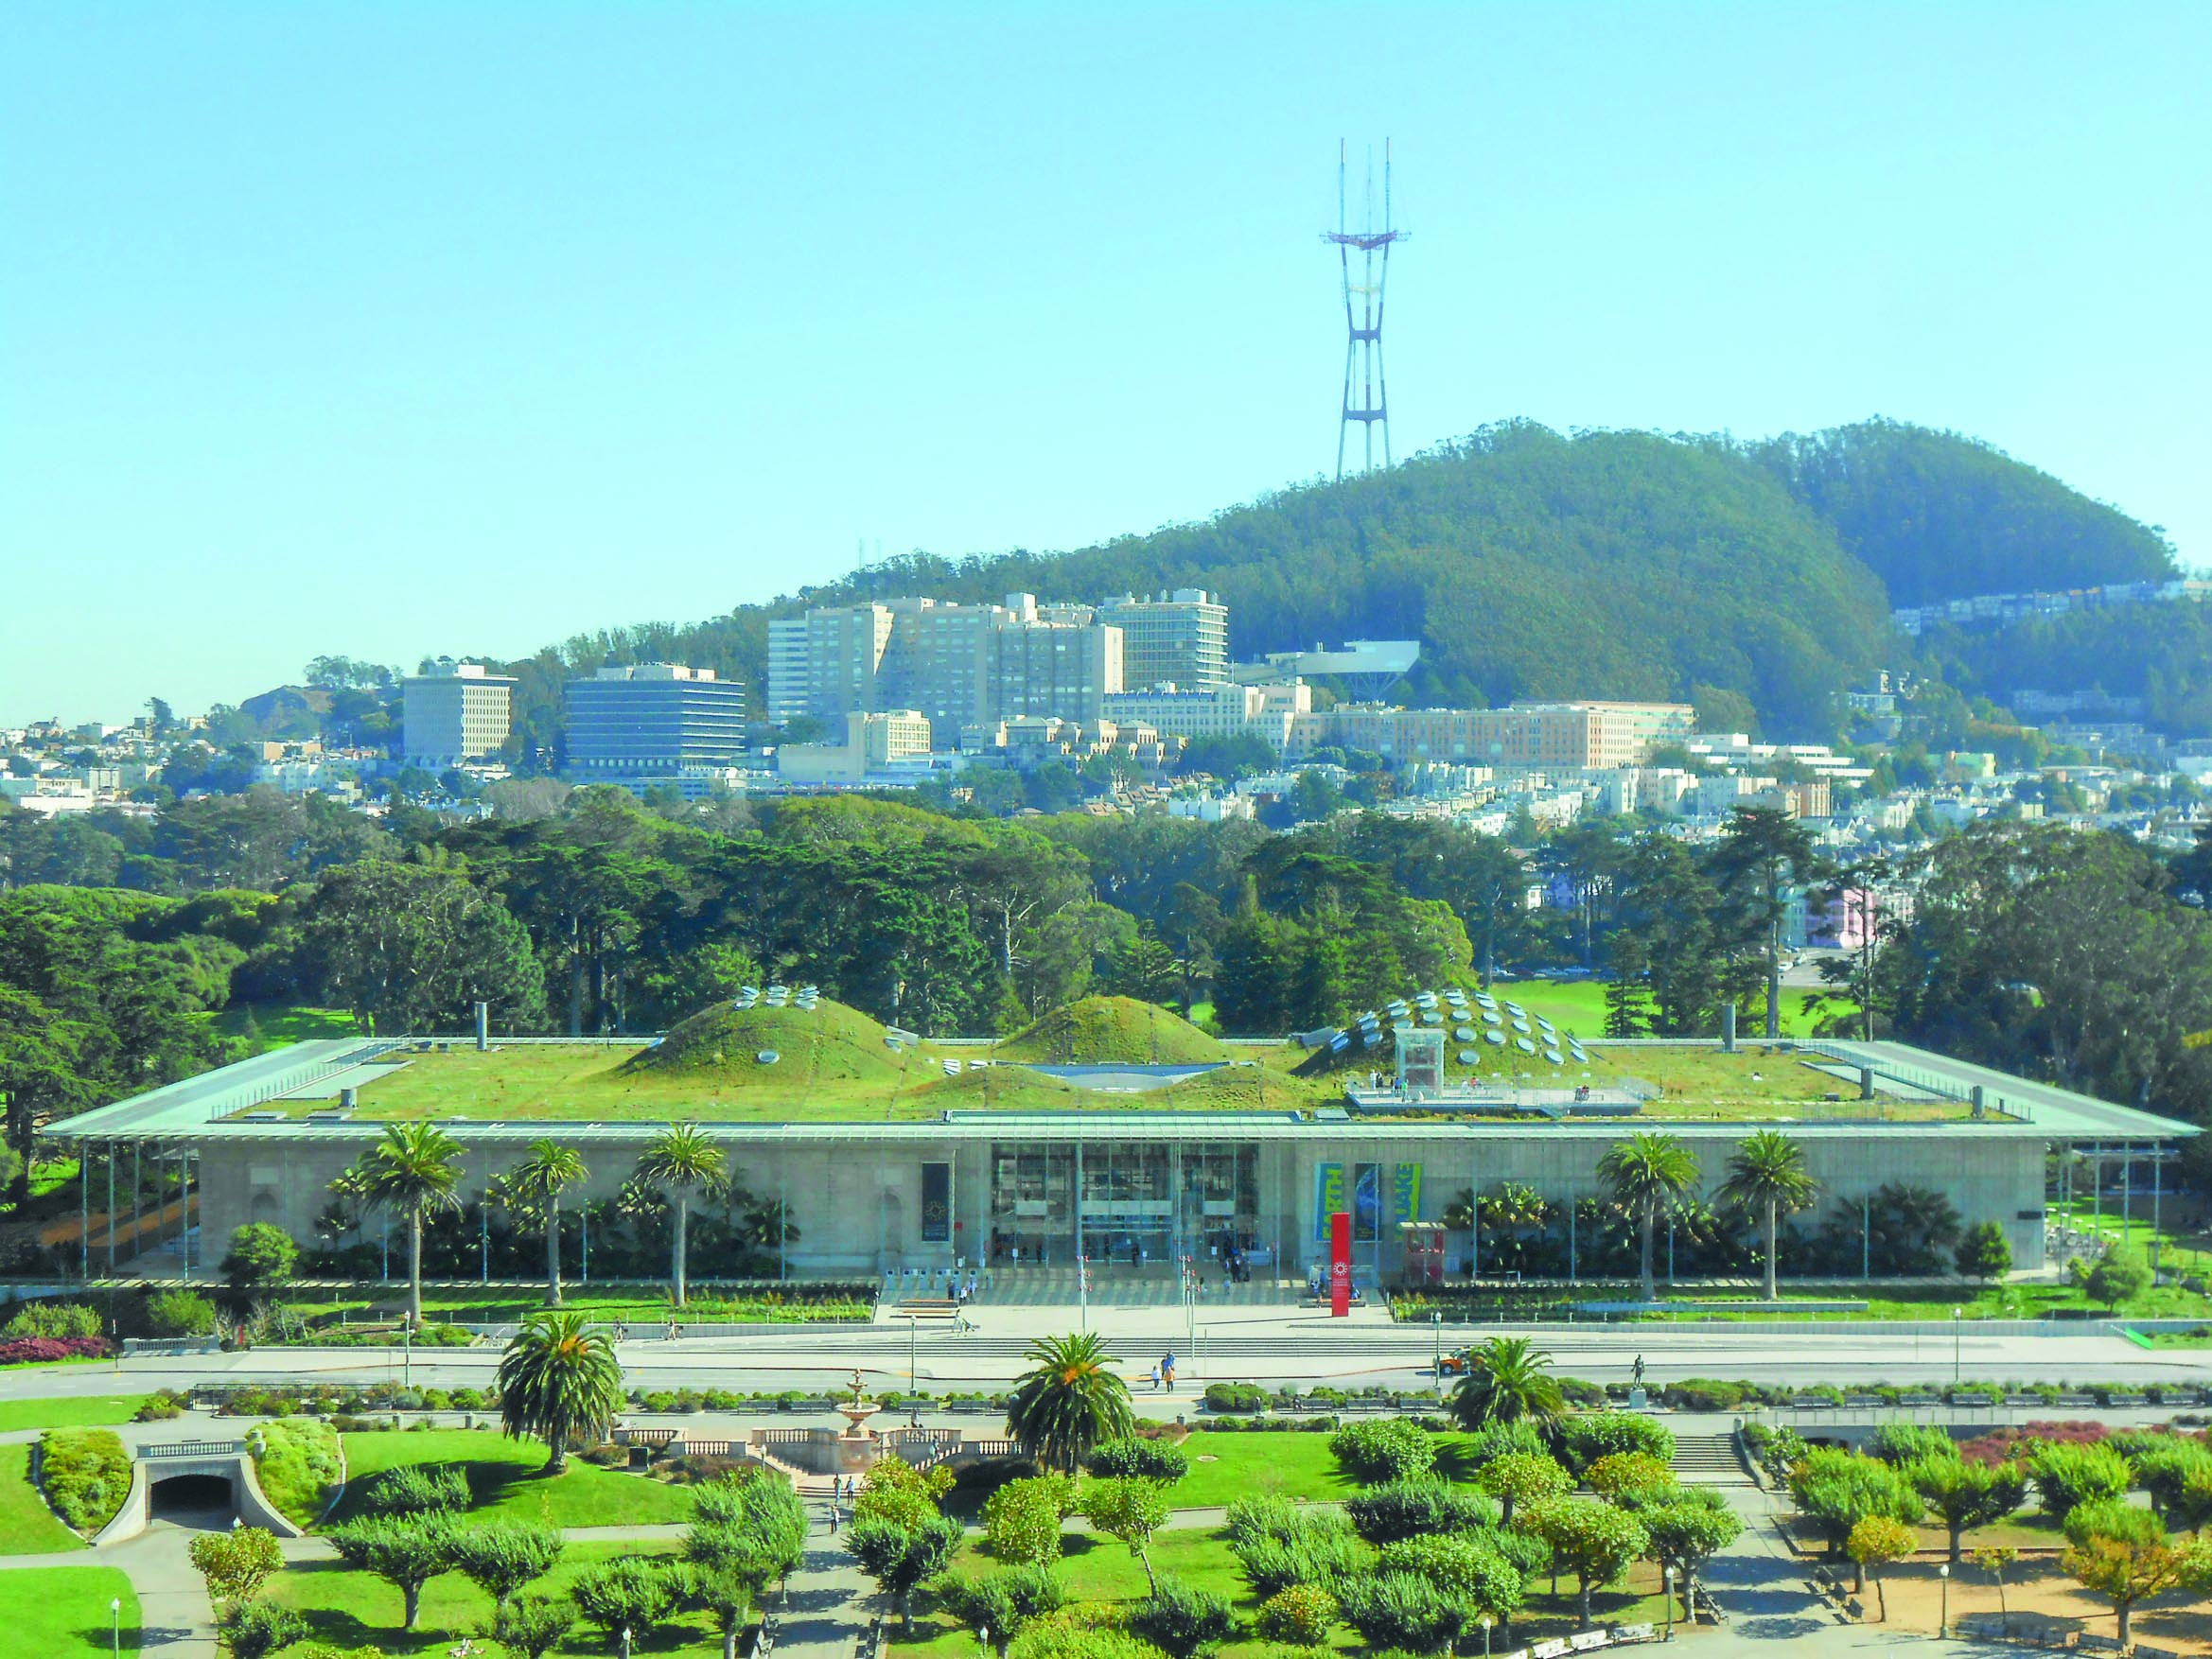 San Francisco, USA - October 17, 2013: The California Academy of Science is among the largest museums of natural history in the world and was designed by Italian architect Renzo Piano